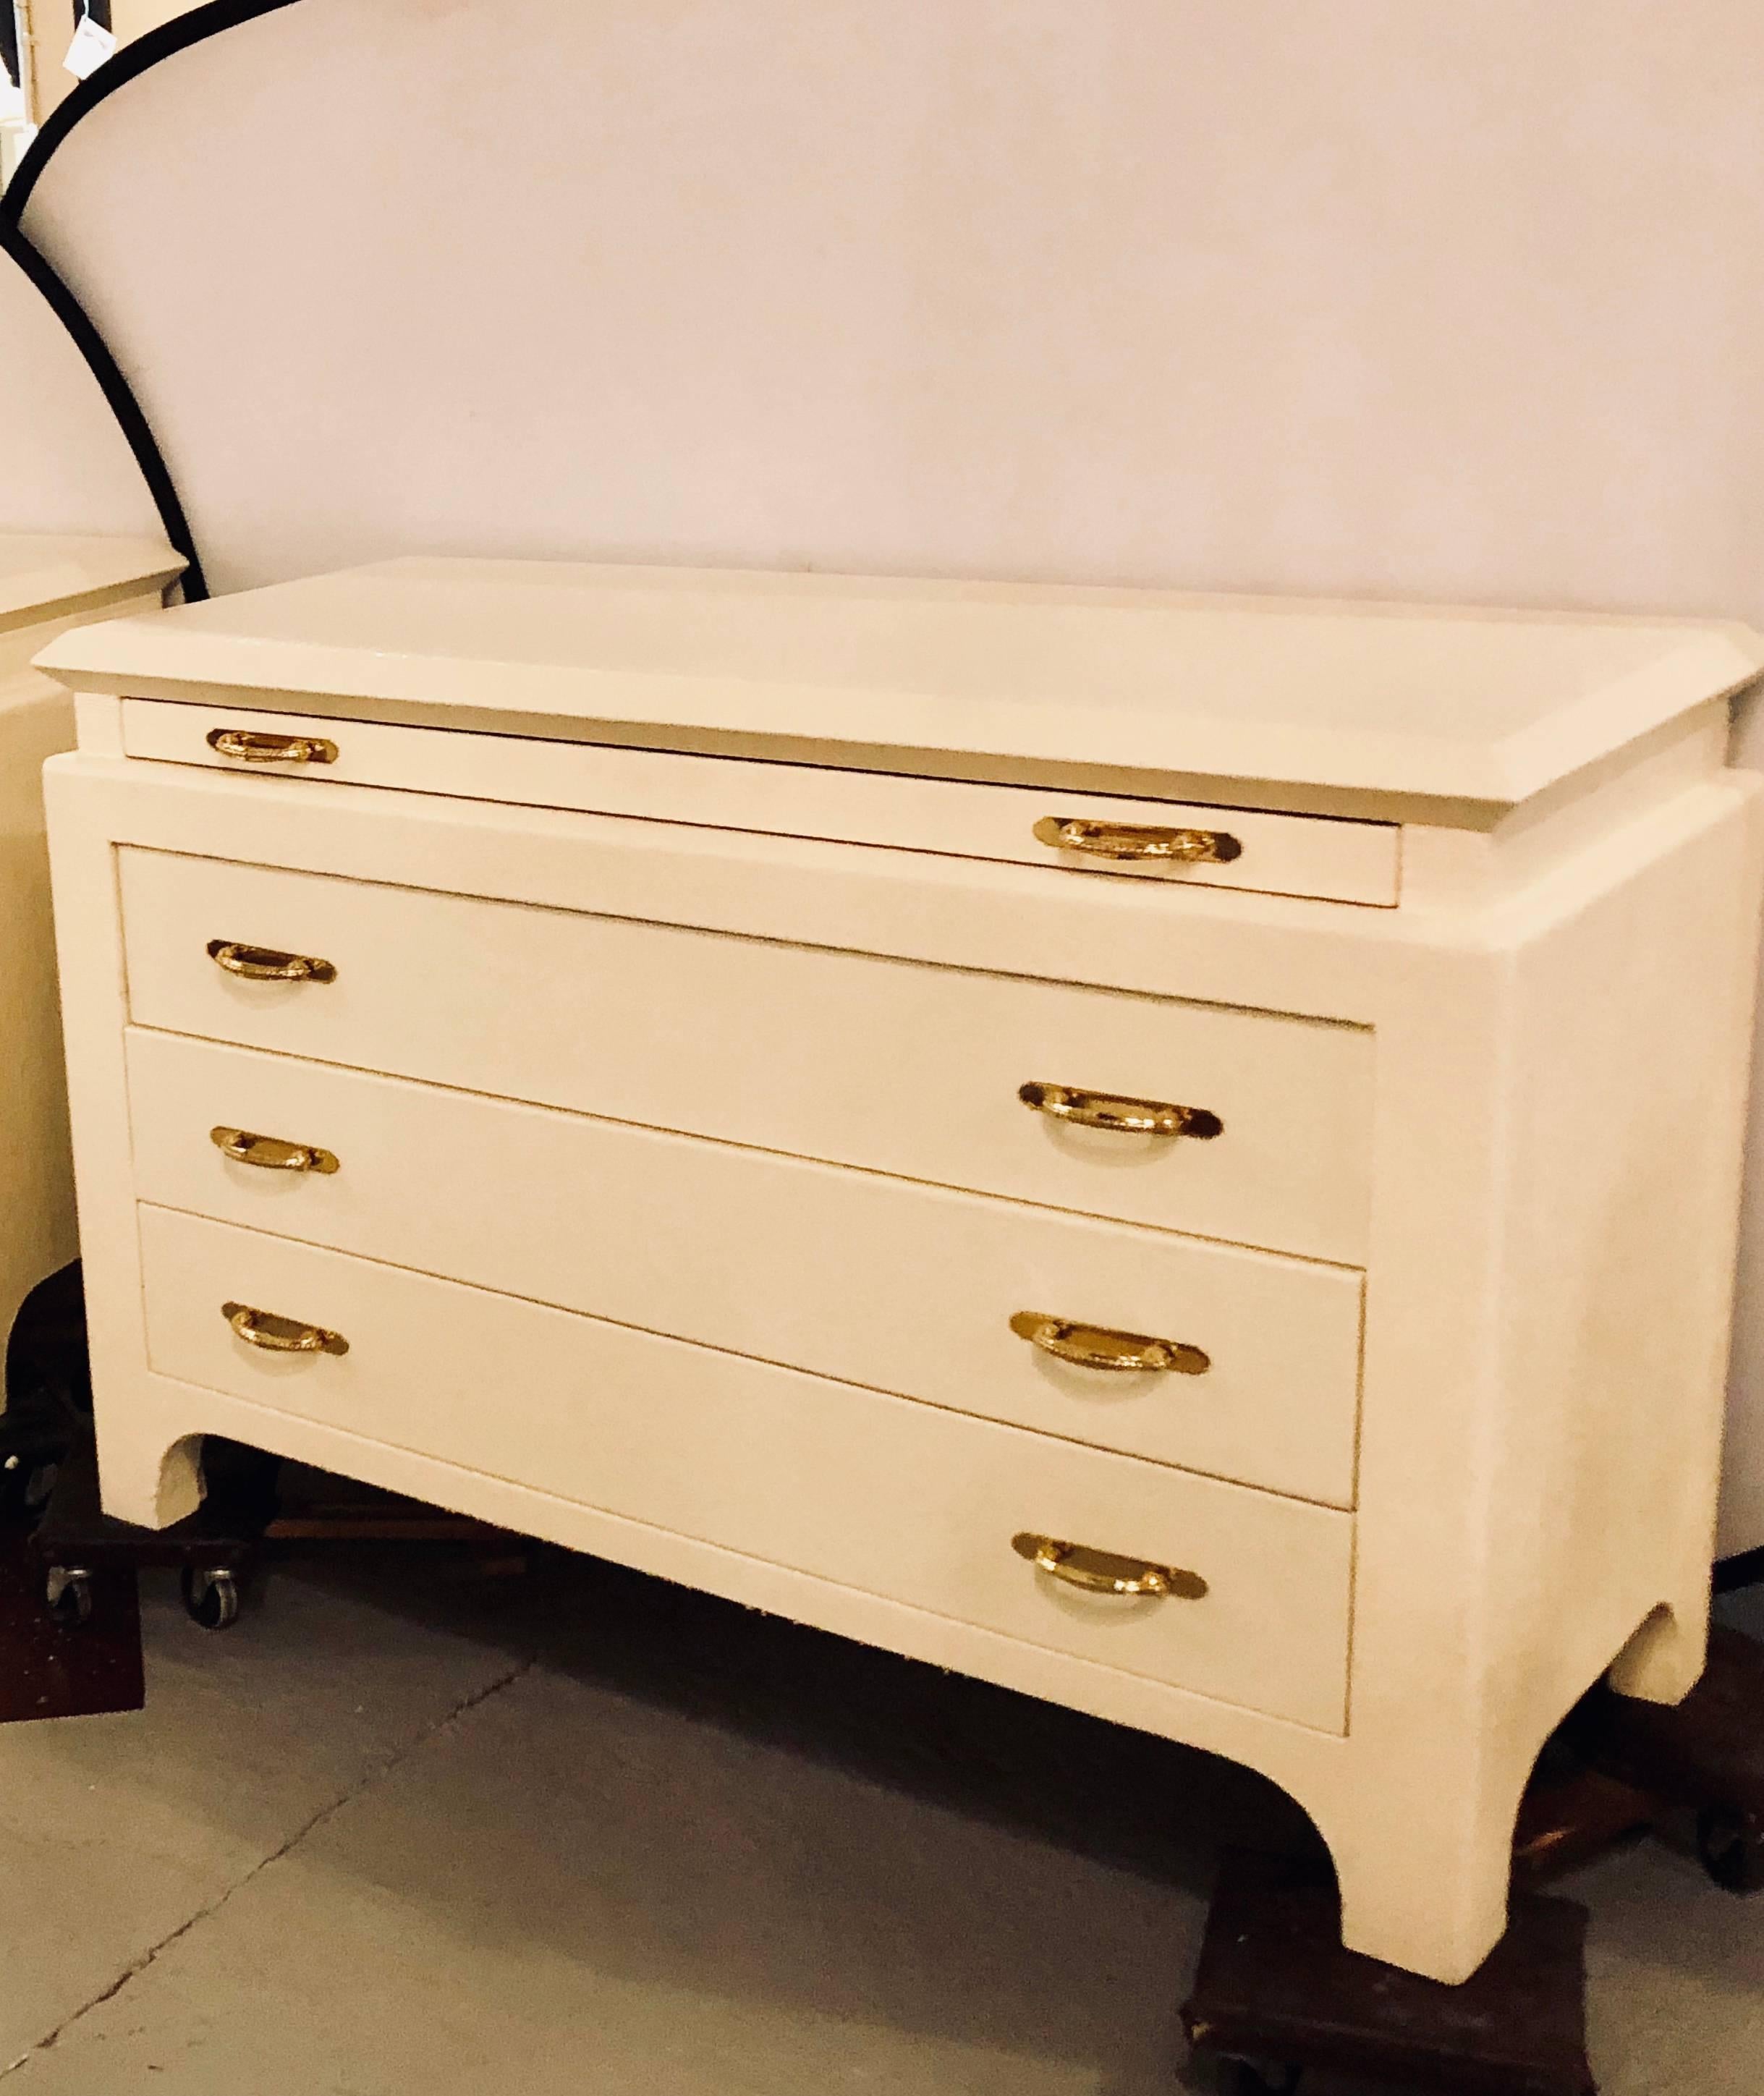 A pair of custom quality commodes, chests or nightstands each linen wrapped. The pair having oak lined interiors of three drawers with bronze pulls under a large pull-out tray all of which slide and glide effortlessly. The whole sitting on bracket.